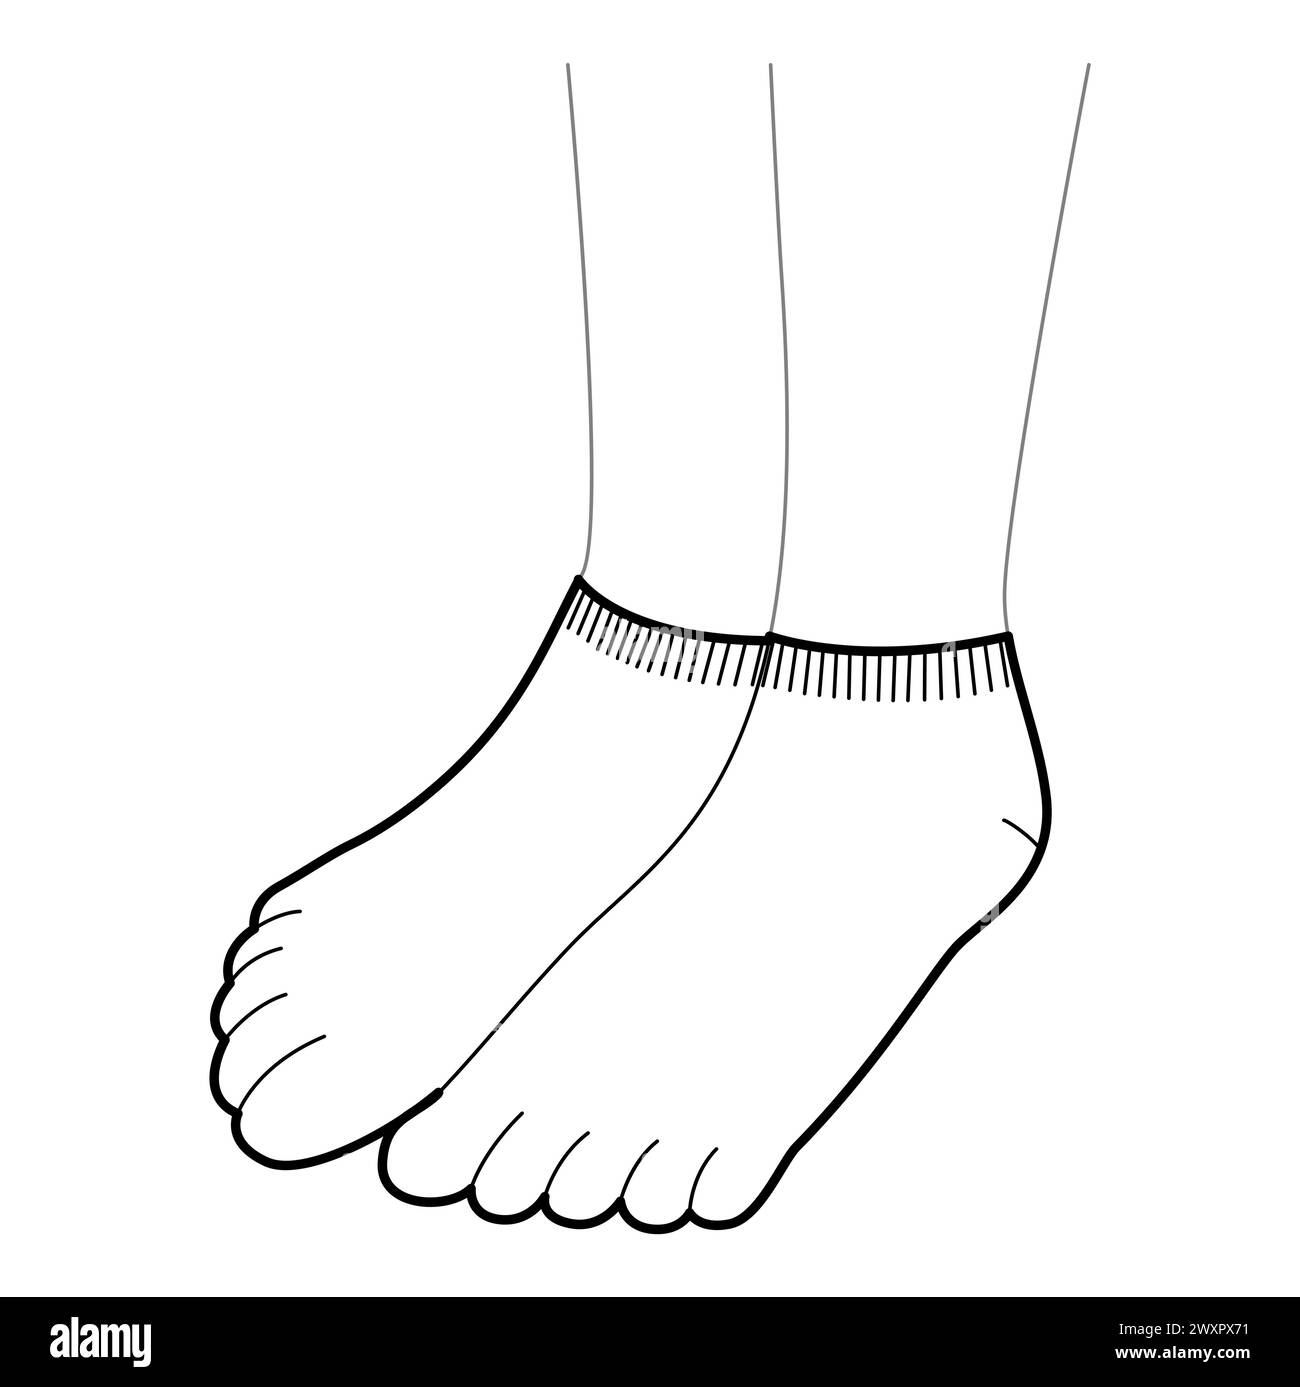 Toe Socks hosiery Invisible length. Fashion accessory clothing technical illustration stocking. Vector 3-4 view for Men, women, unisex style flat template CAD mockup sketch outline on white background Stock Vector